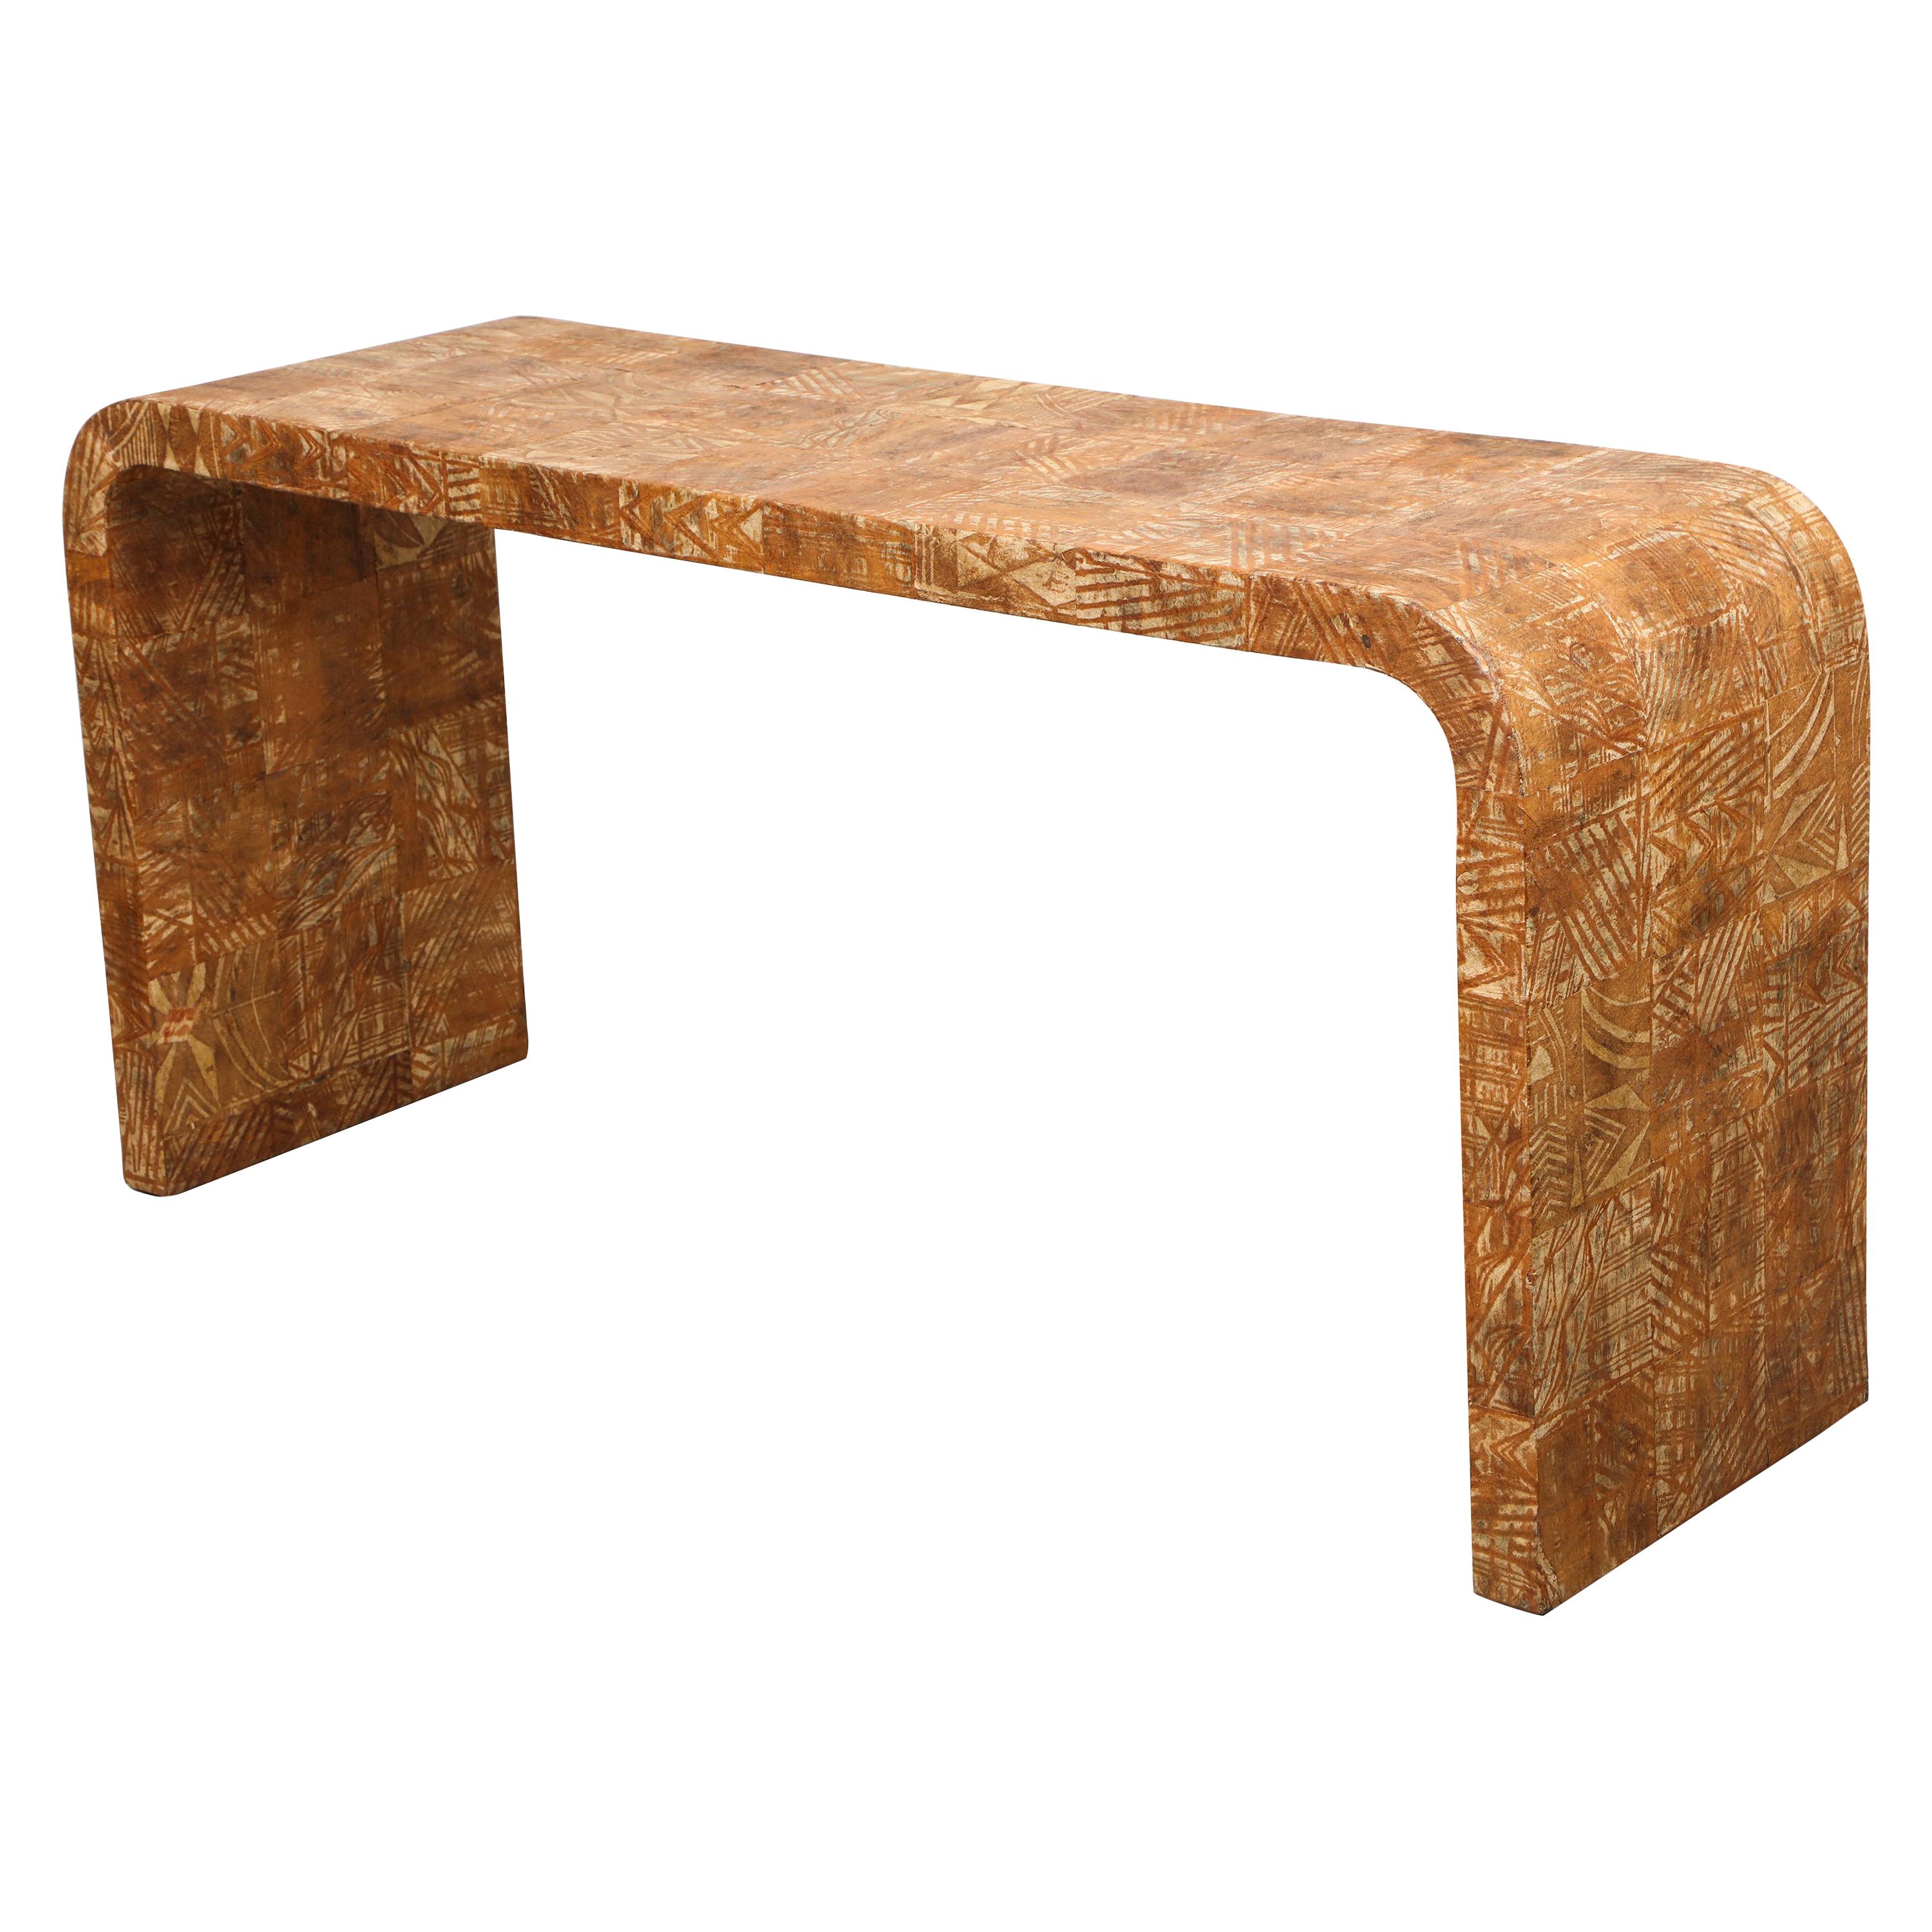 Unusual vintage hand-stenciled bark console table.